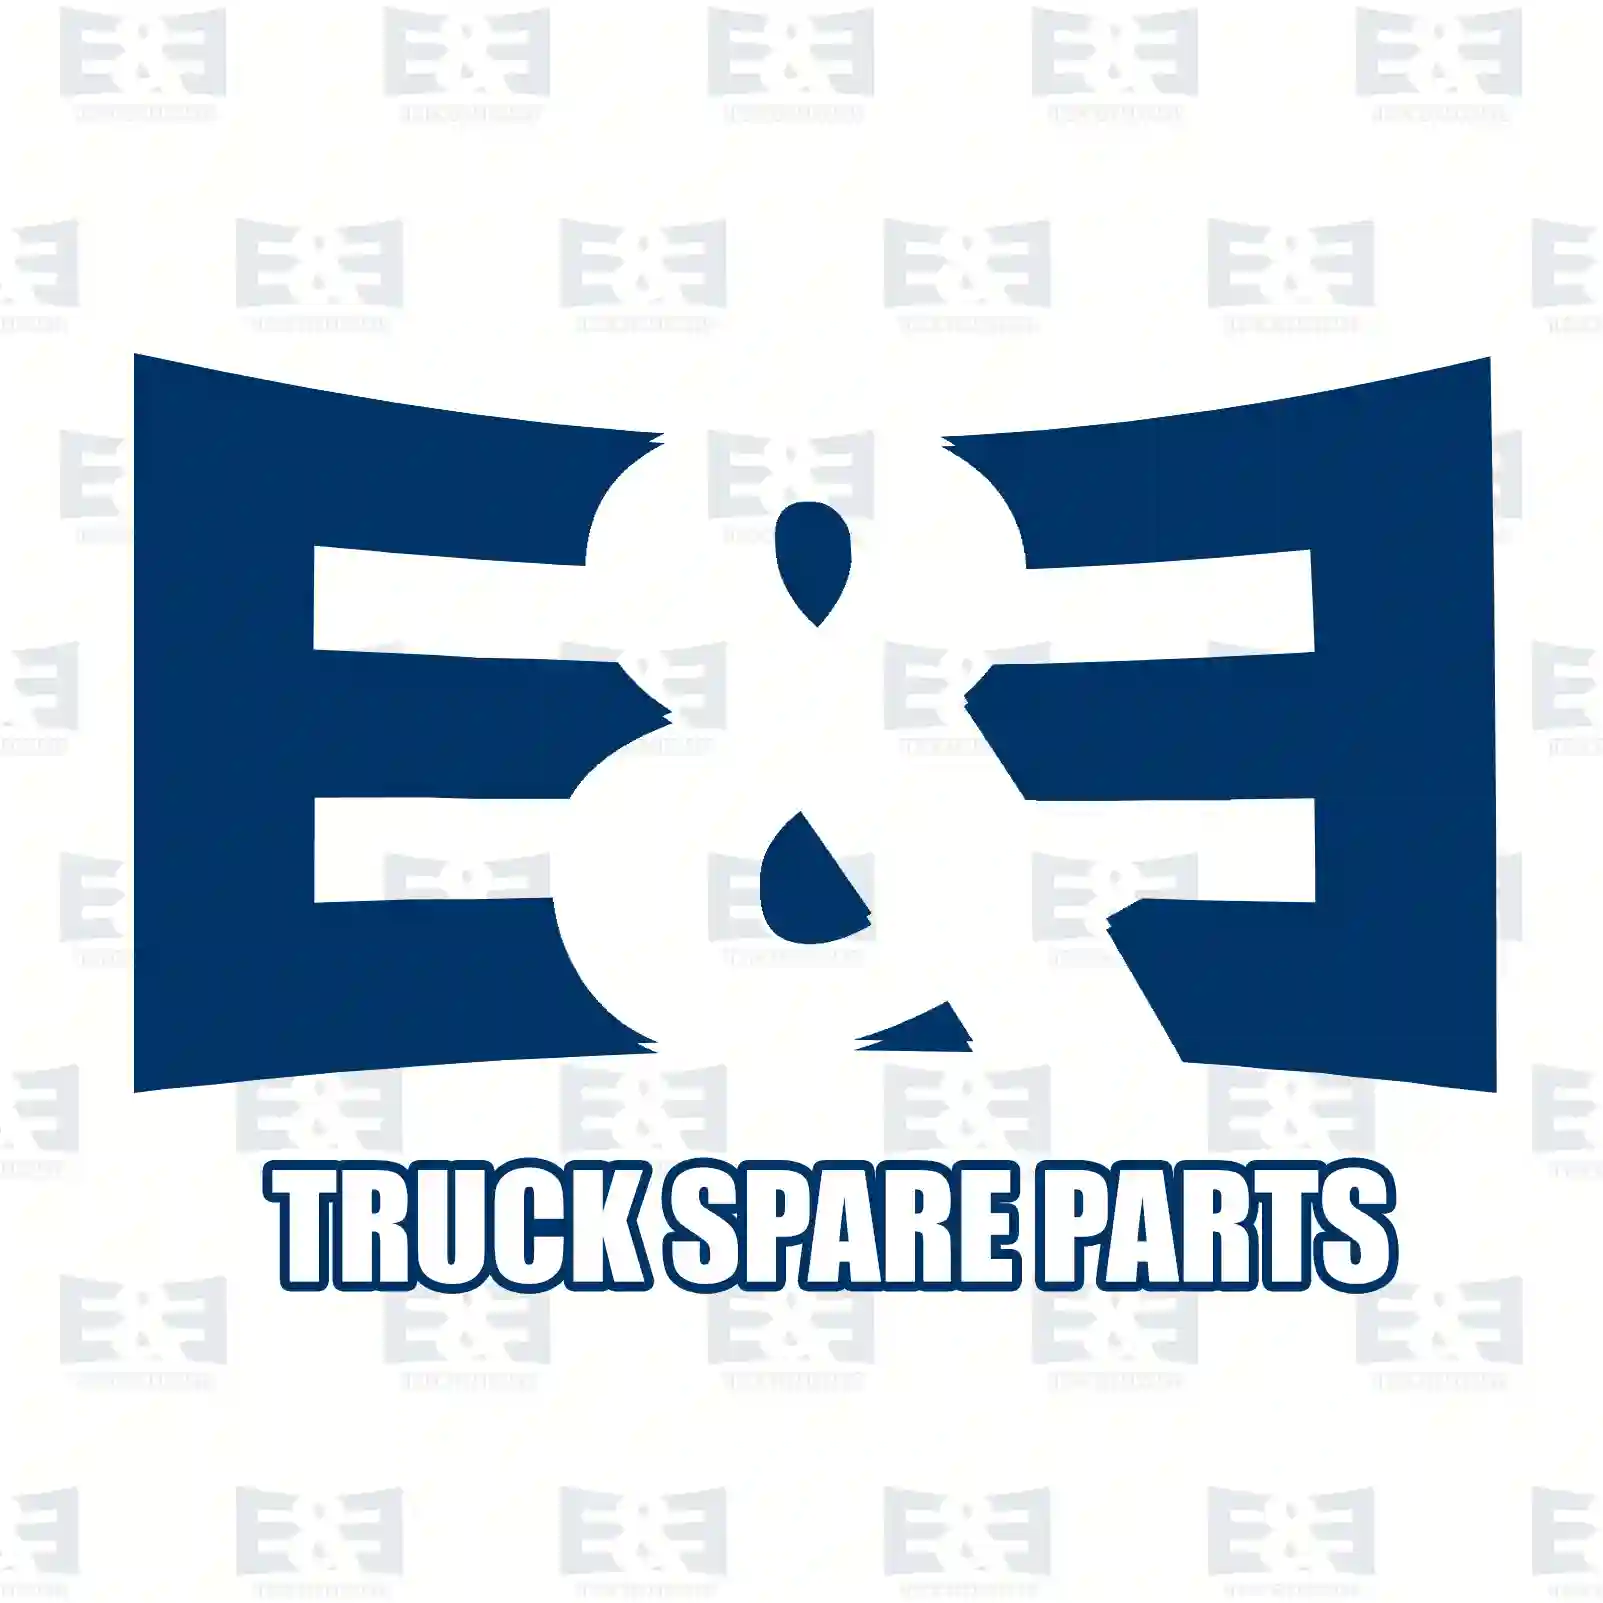  Tensioning band, air tank || E&E Truck Spare Parts | Truck Spare Parts, Auotomotive Spare Parts